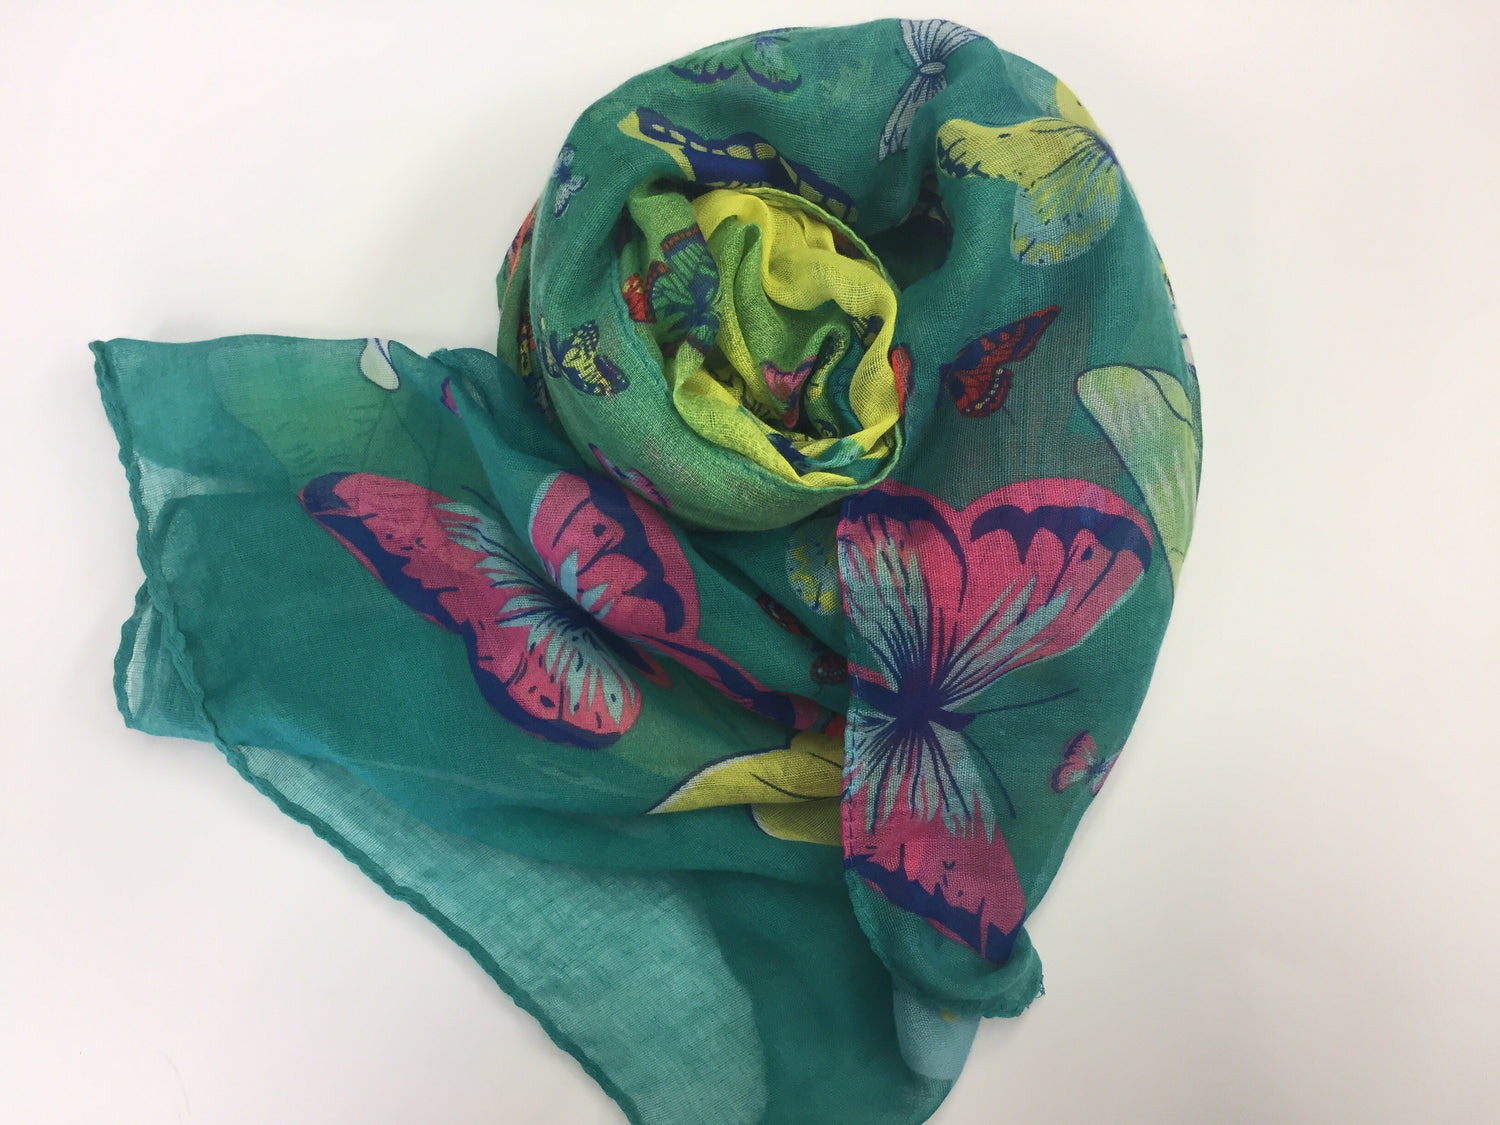 soft turquoise green hijab printed with butterflies in green, pink, yellow, purple, and blue